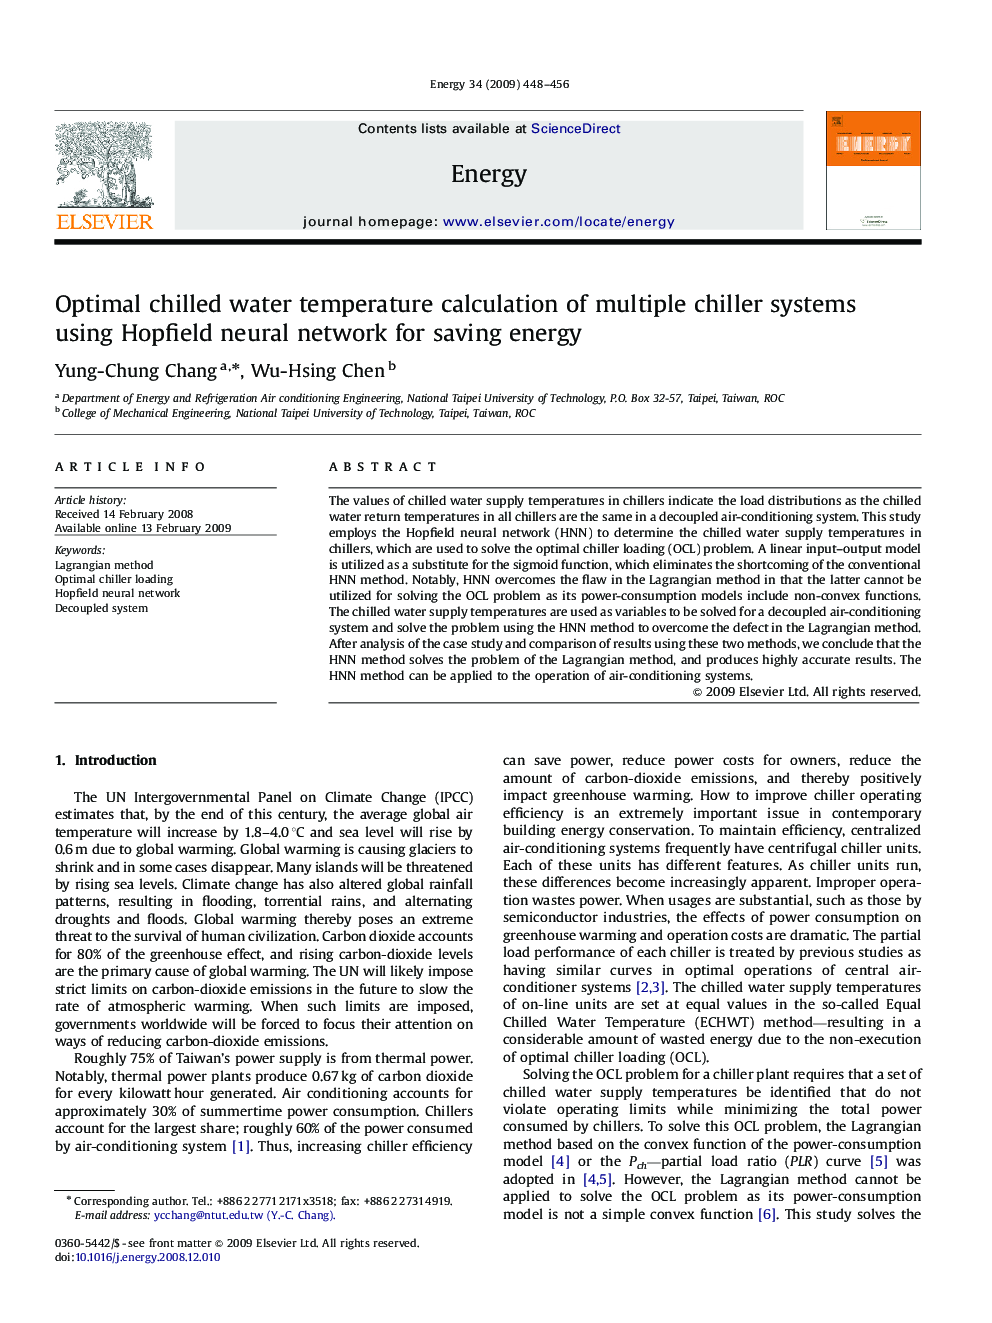 Optimal chilled water temperature calculation of multiple chiller systems using Hopfield neural network for saving energy